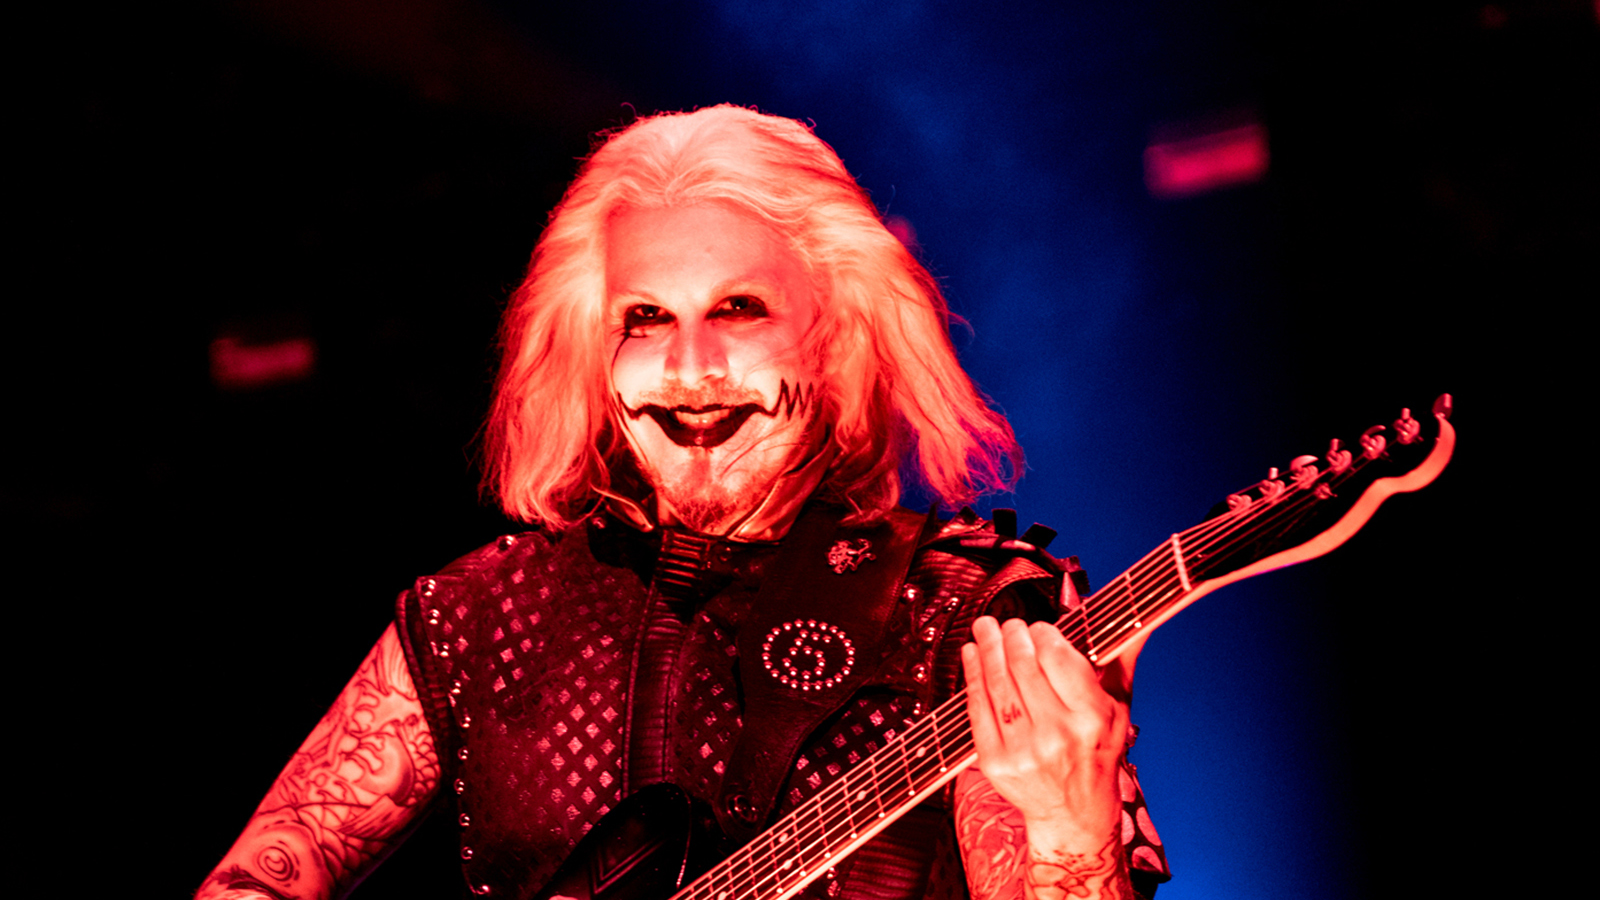 John 5 On How Ac Dc S Highway To Hell Taught Him To Be A Better